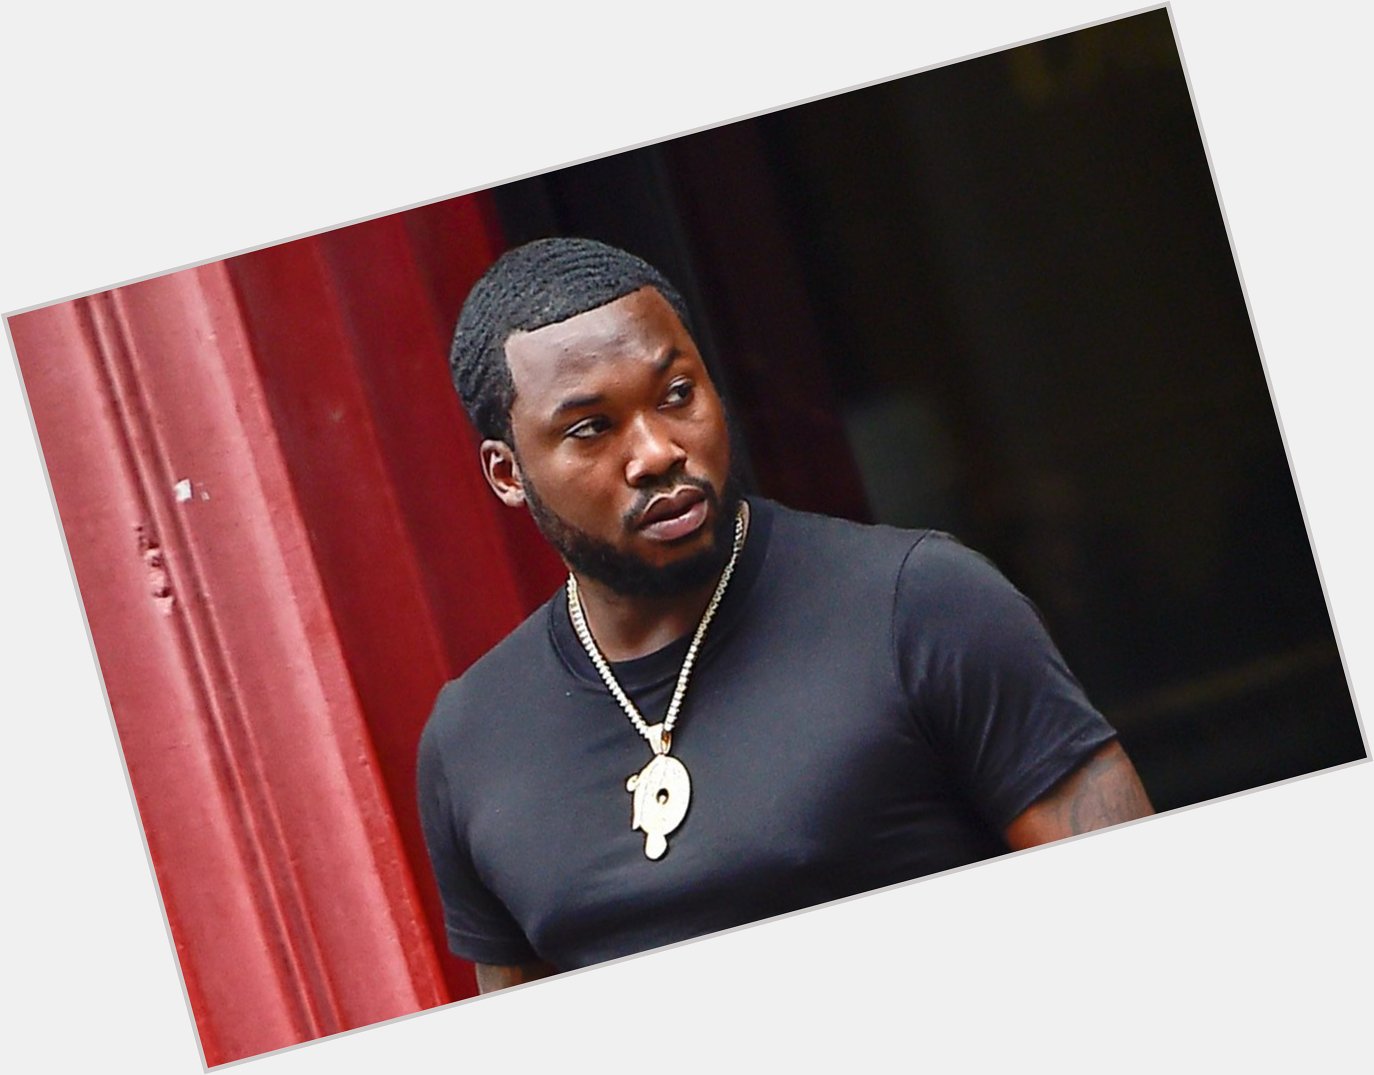 Happy 33rd Birthday to Meek Mill, what s your favourite song by him? 